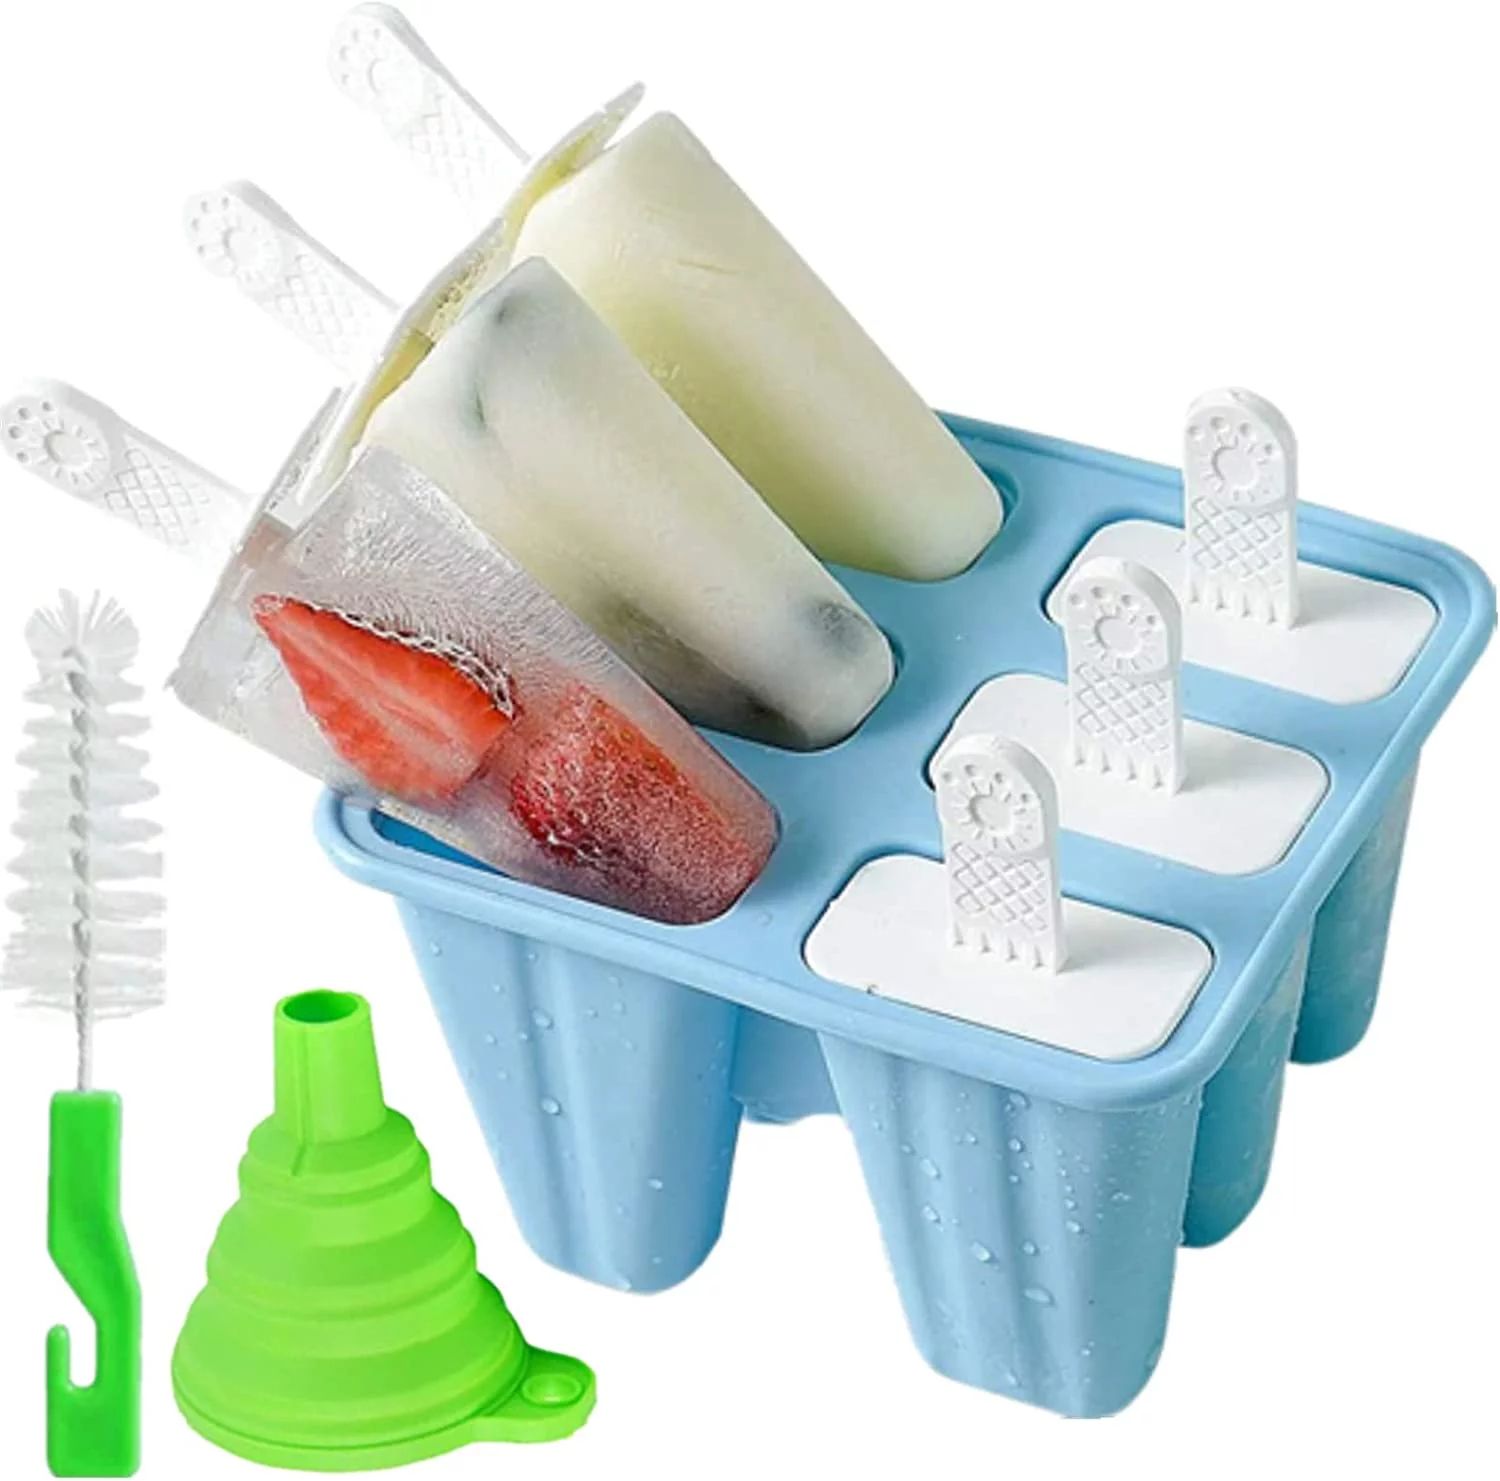 Popsicle Molds 6 Pieces Silicone Ice Pop Molds BPA Free Popsicle Mold Reusable Easy Release Ice P... | Walmart (US)